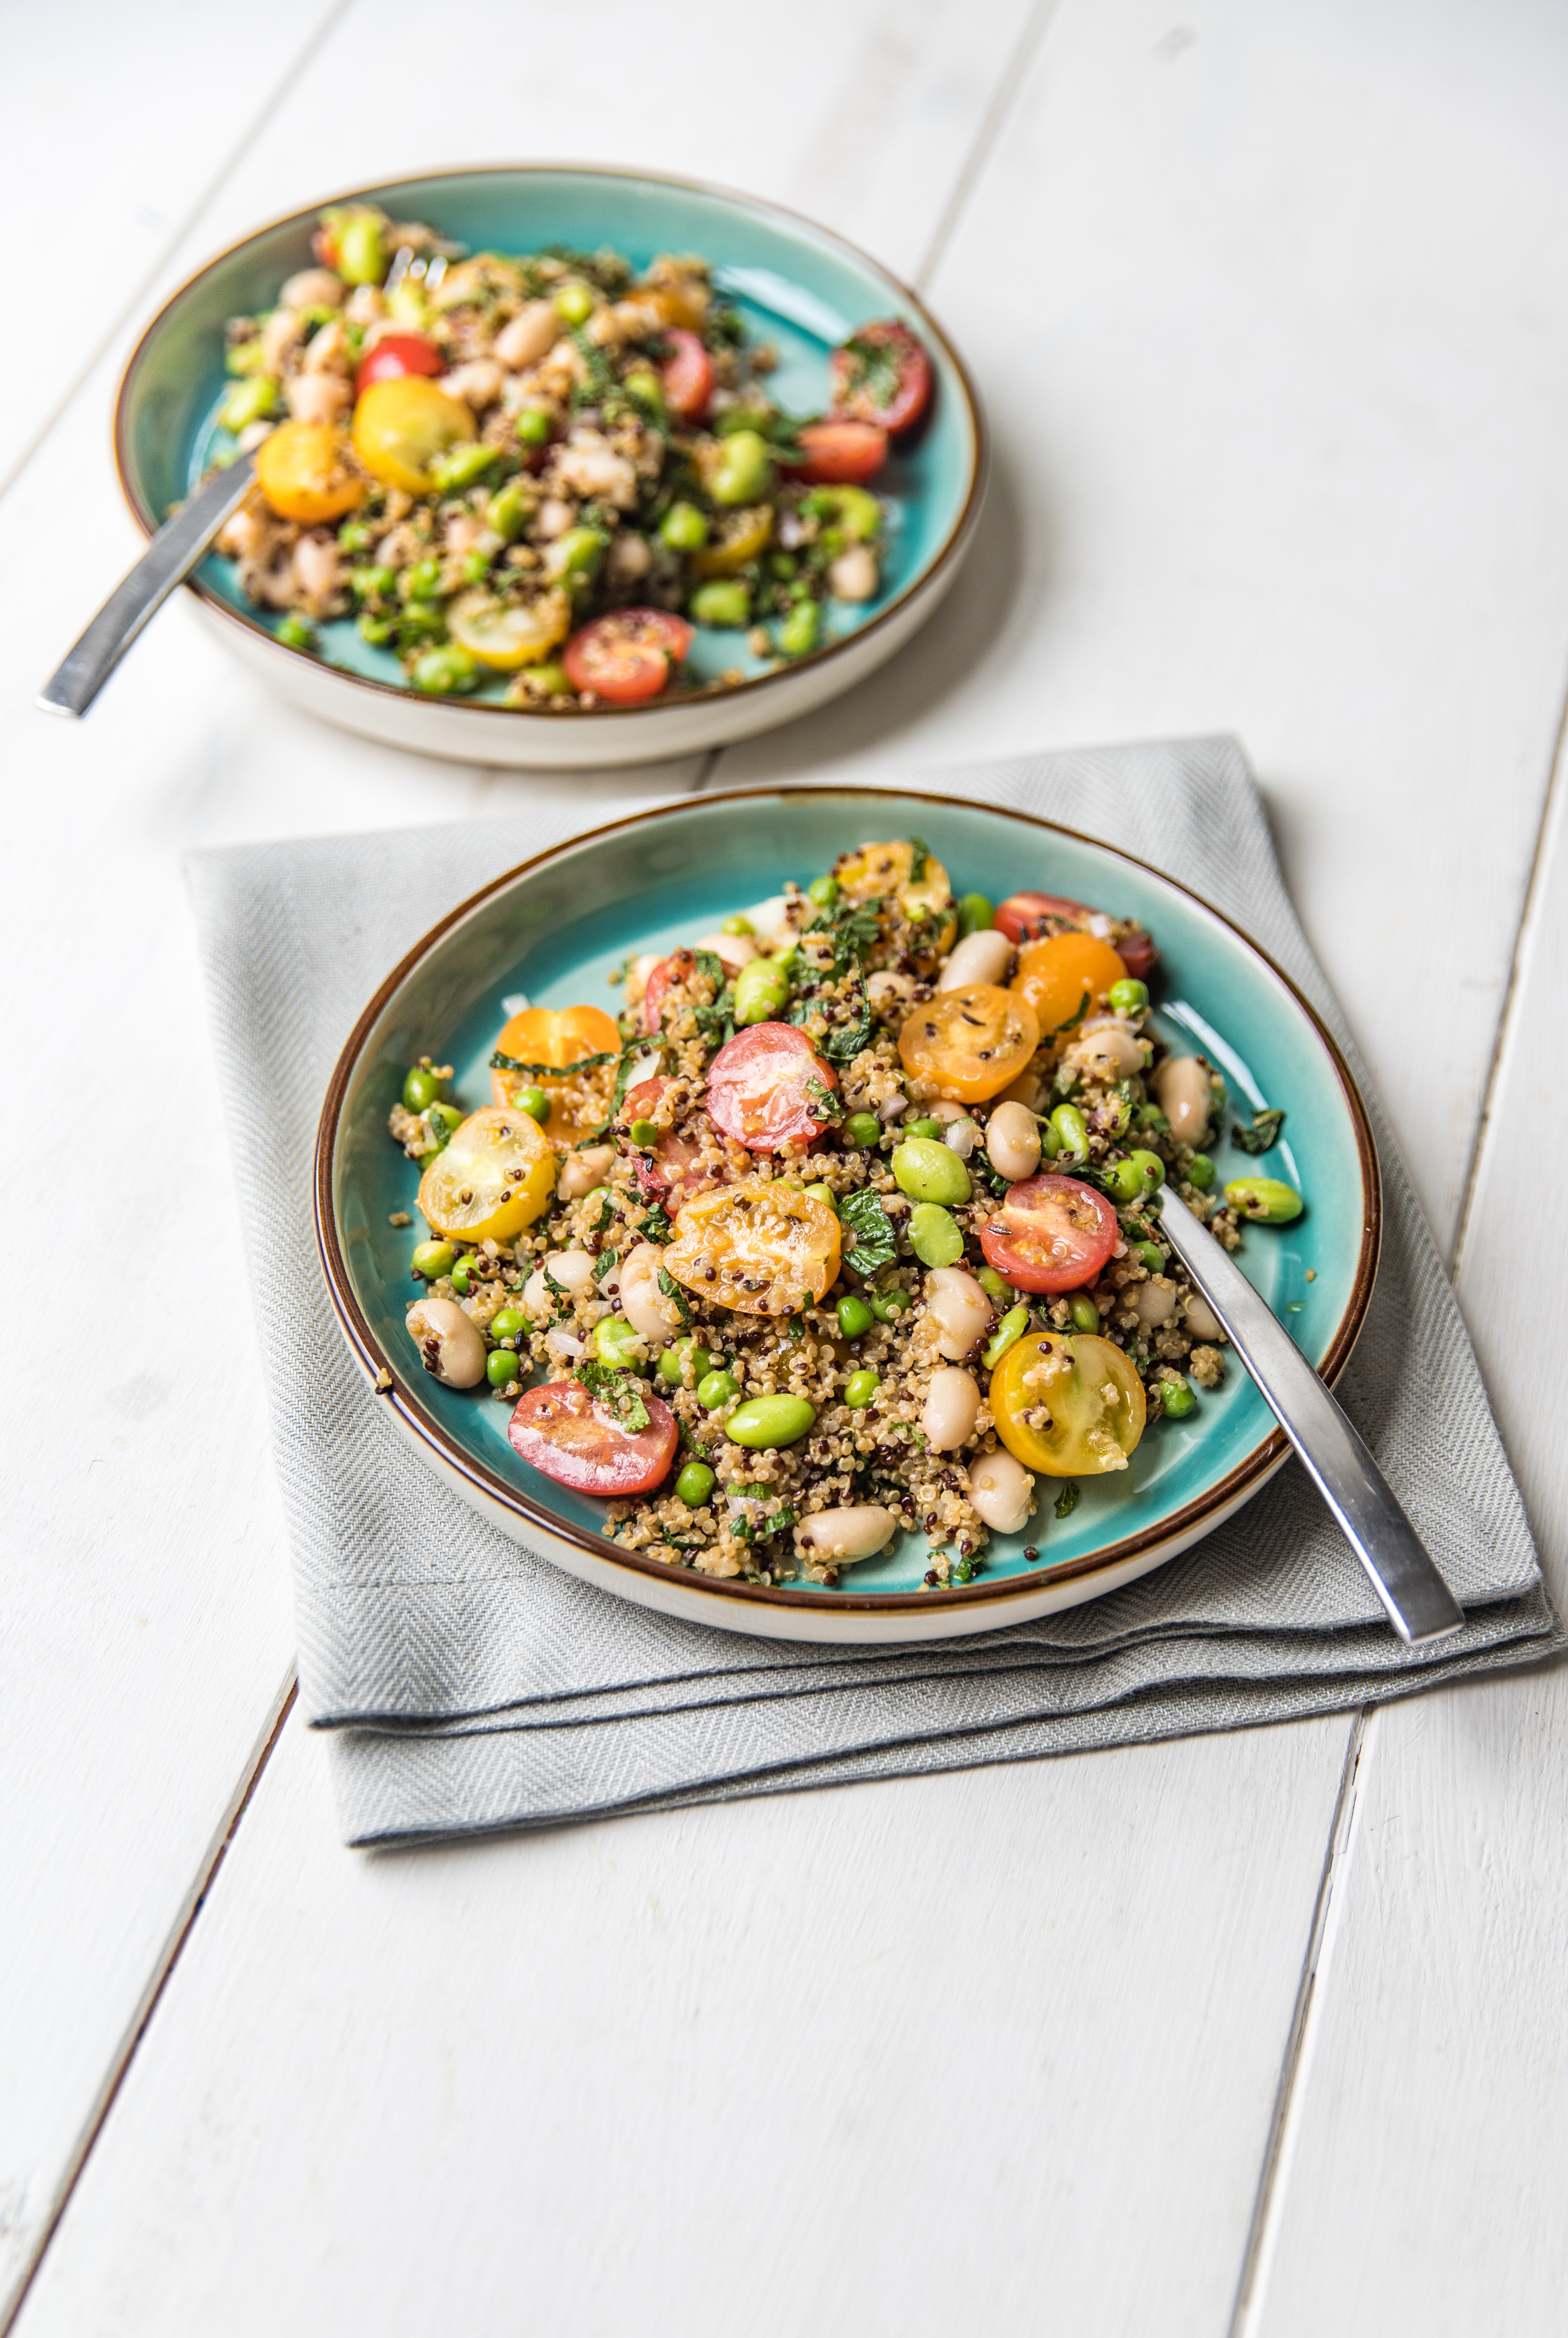 Recipe – a vibrant summer salad to counteract comfort eating